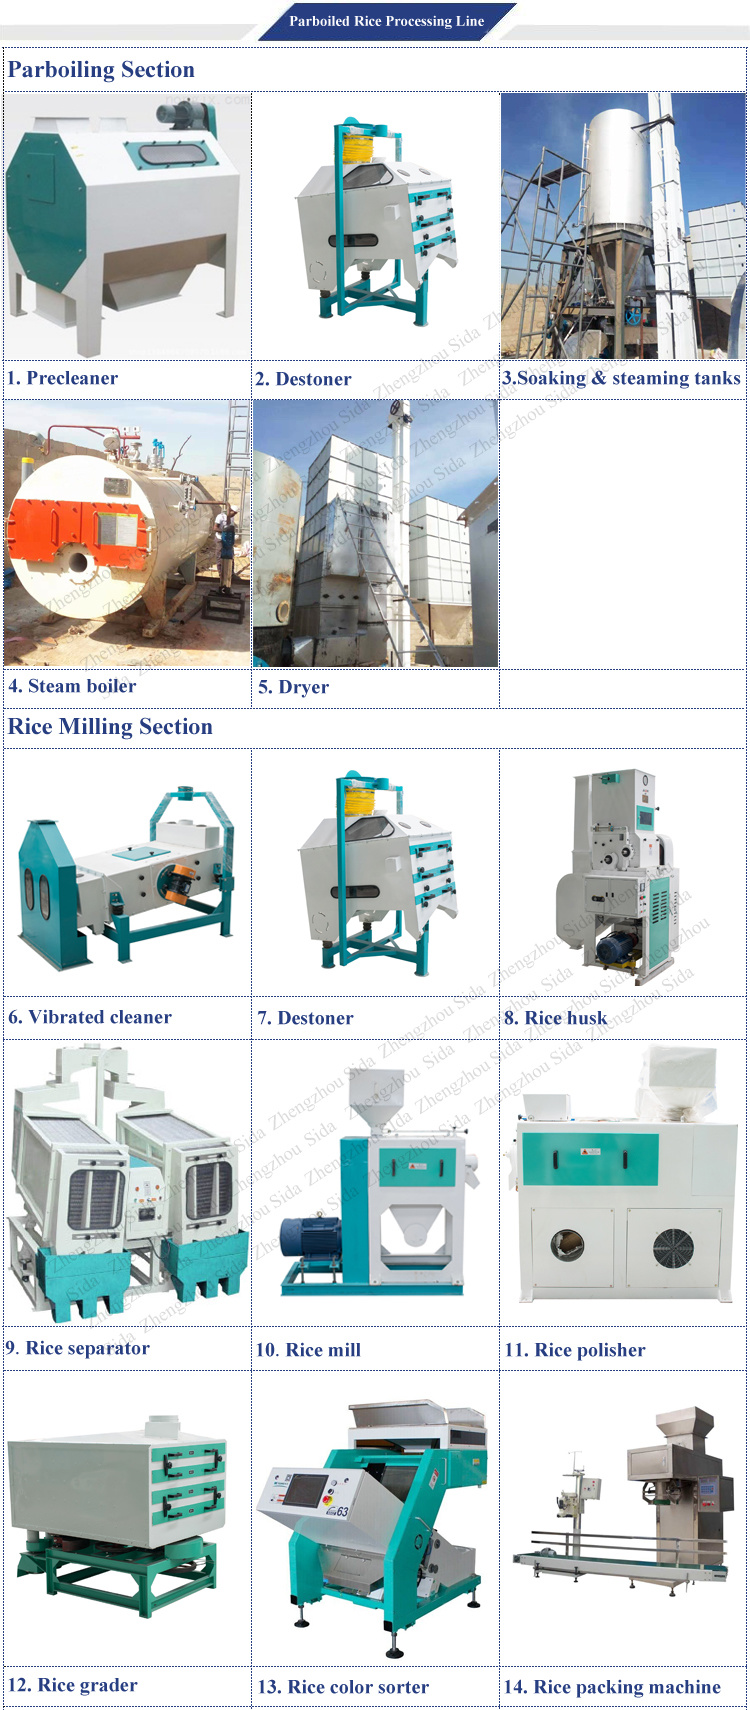 Parboiled Rice Mills Machine for Sale/30tpd Rice Parboiling Machine Price